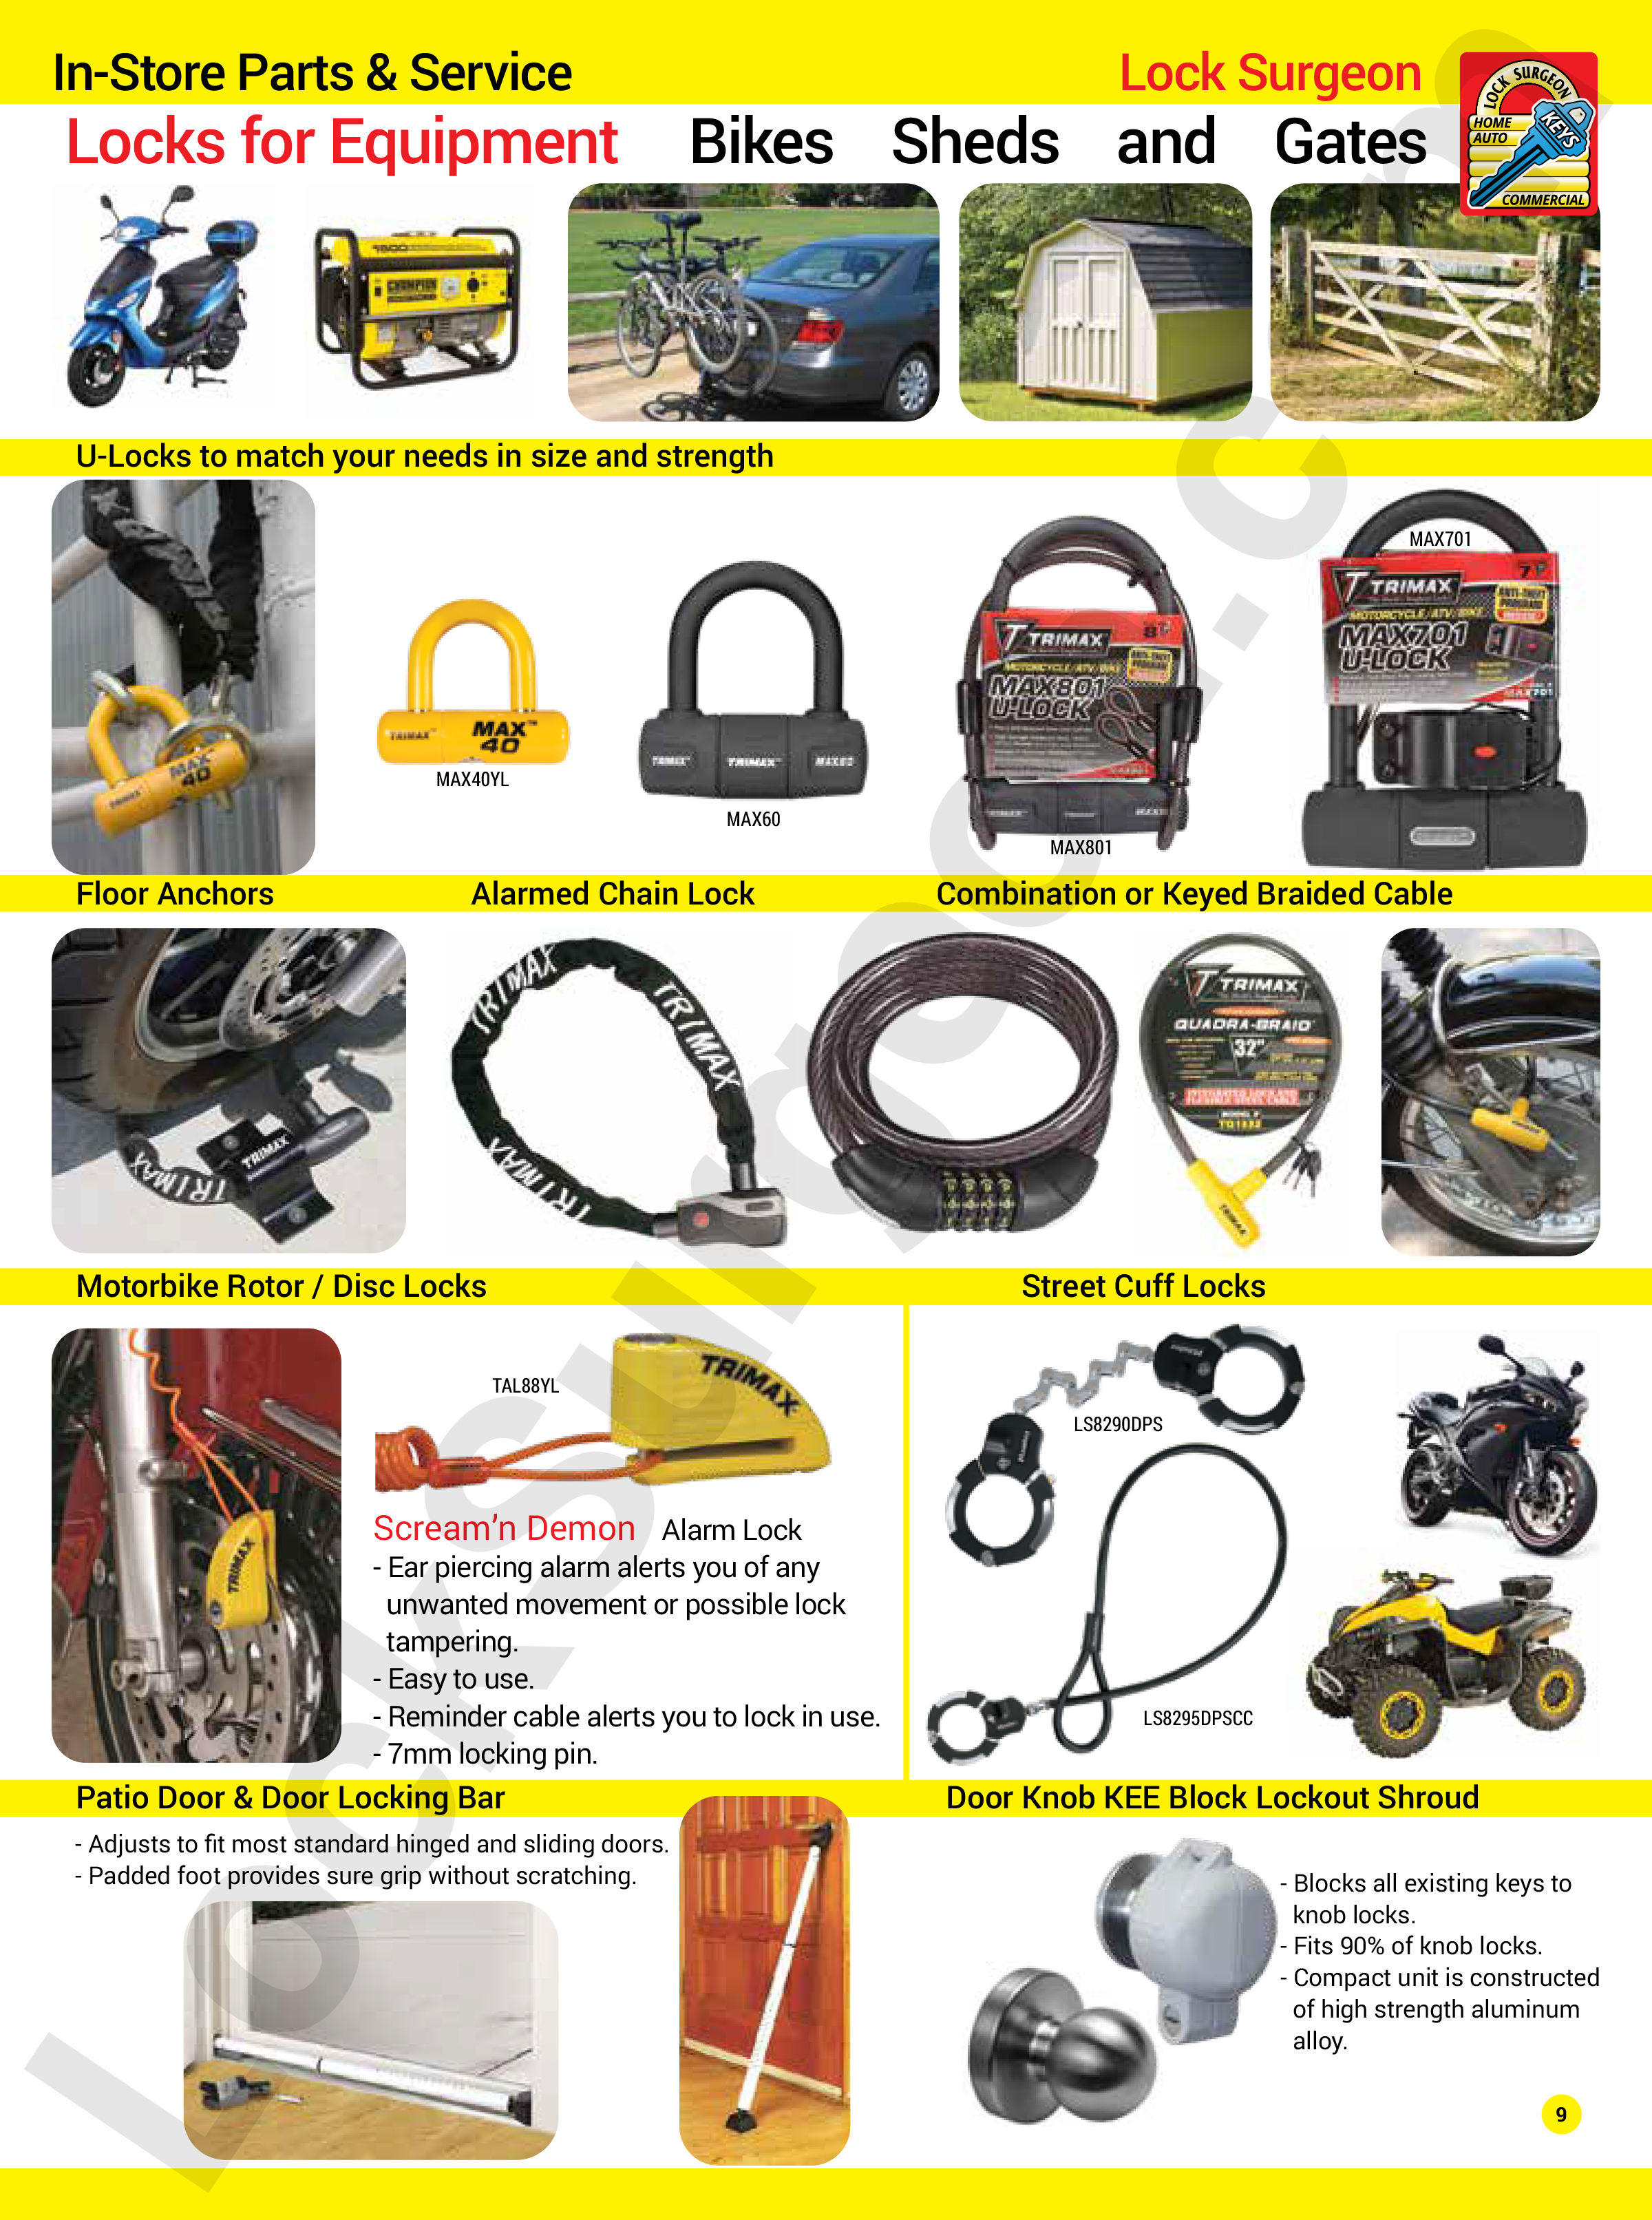 Locks for equipment like bikes sheds gates In-store parts & service U-Locks to match your needs.